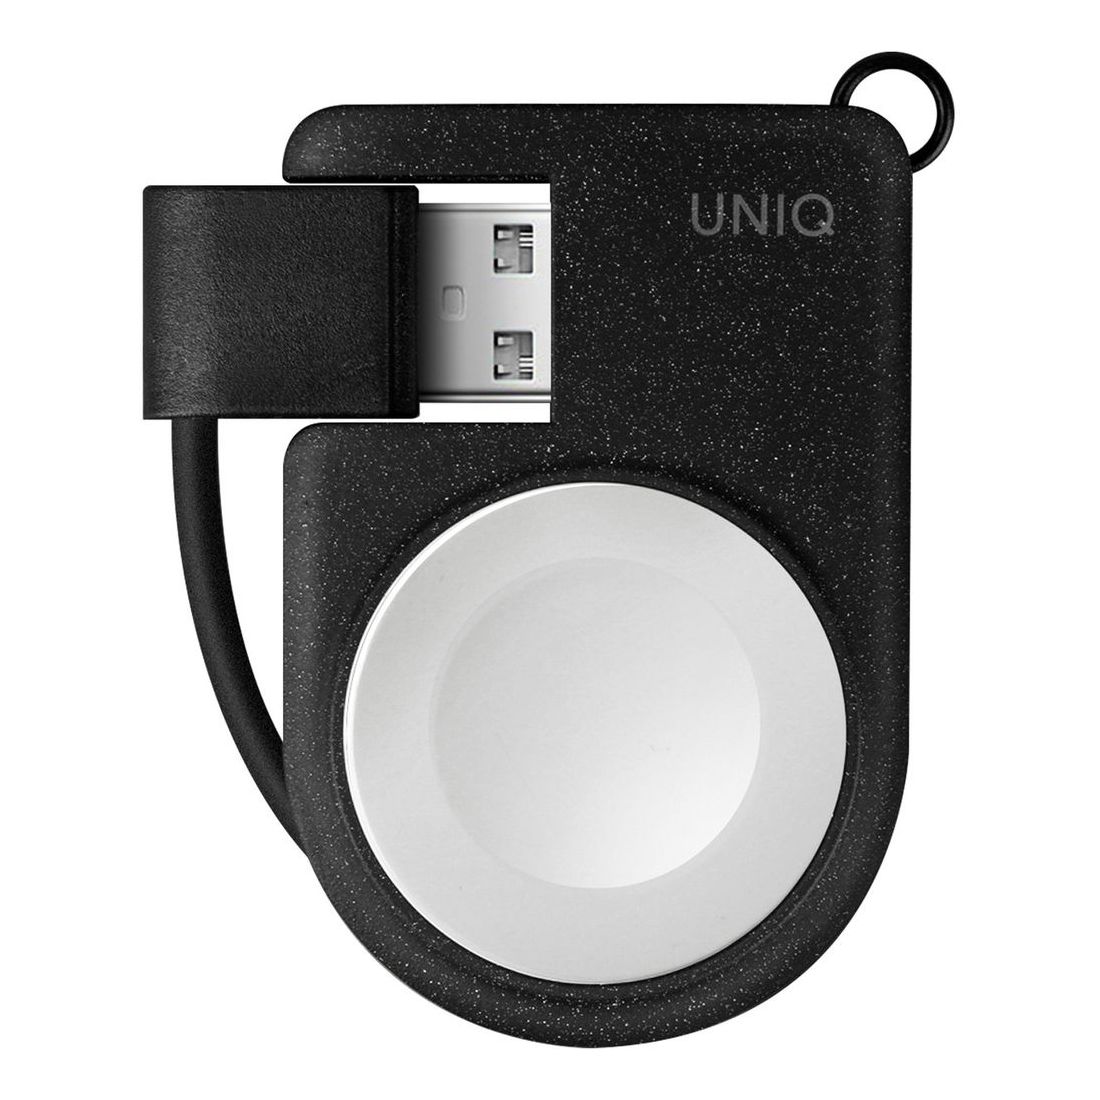 Uniq Cove Charcoal Dark Grey Magnetic Charger for Apple Watch with Built In USB-A Cable